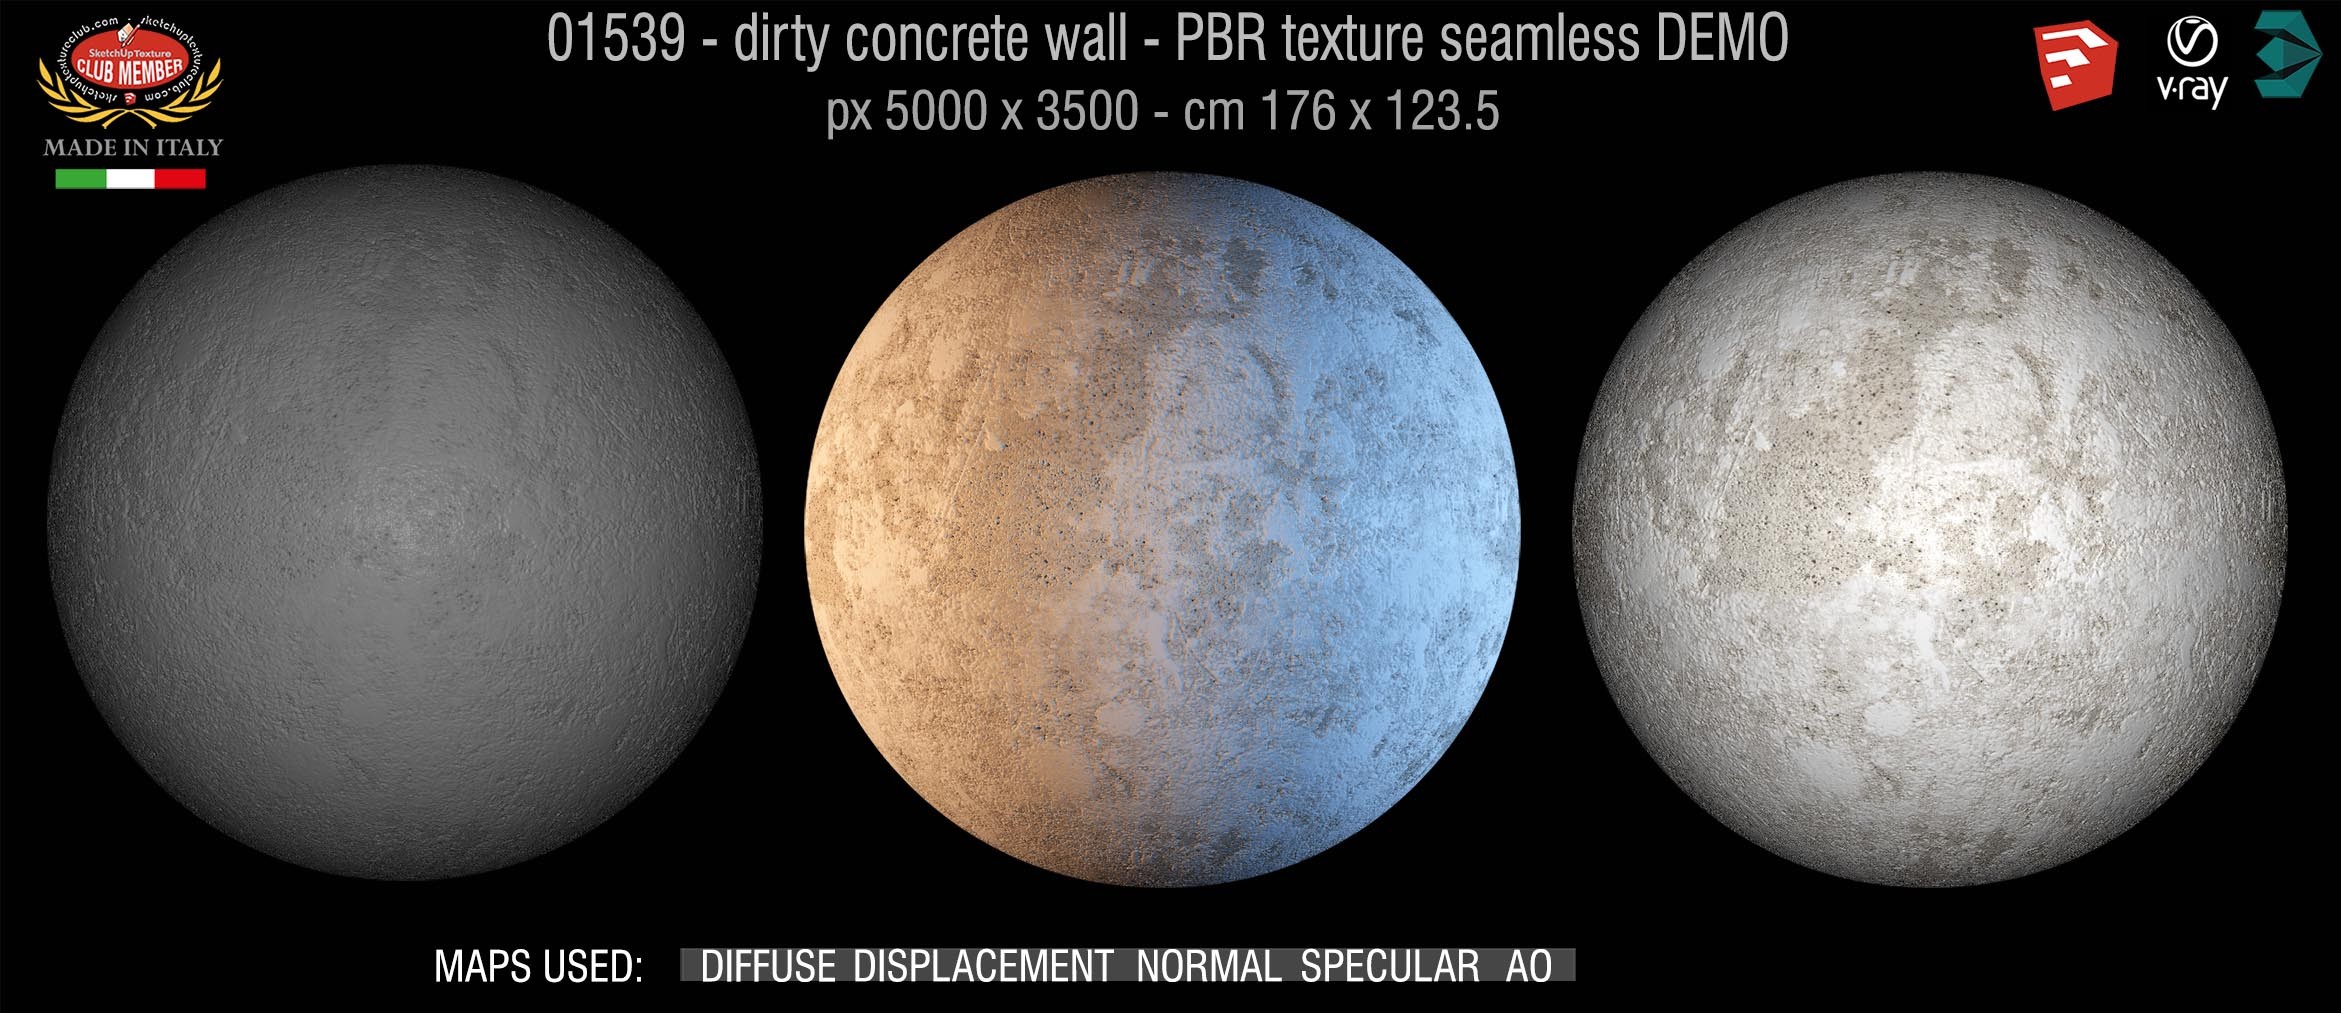 01539 Concrete bare dirty wall PBR texture seamless DEMO